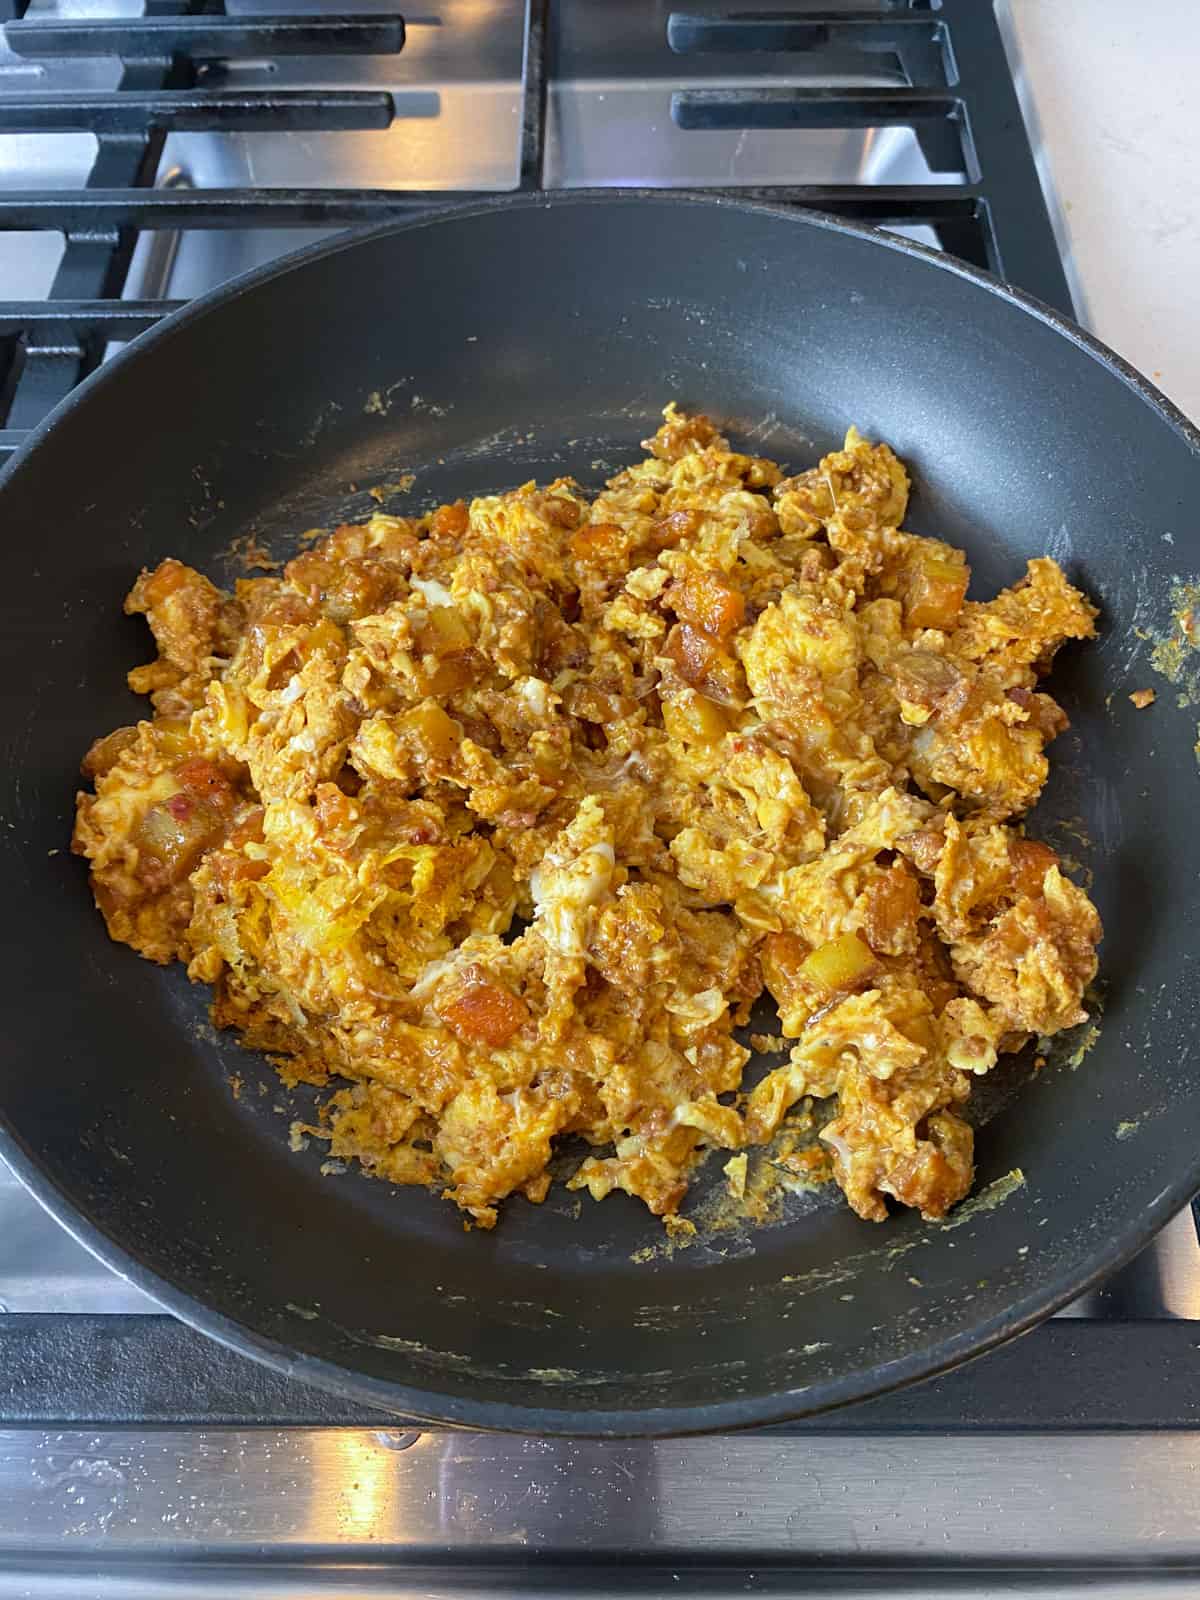 Scramble the eggs with the chorizo and potatoes until the eggs are just cooked through.